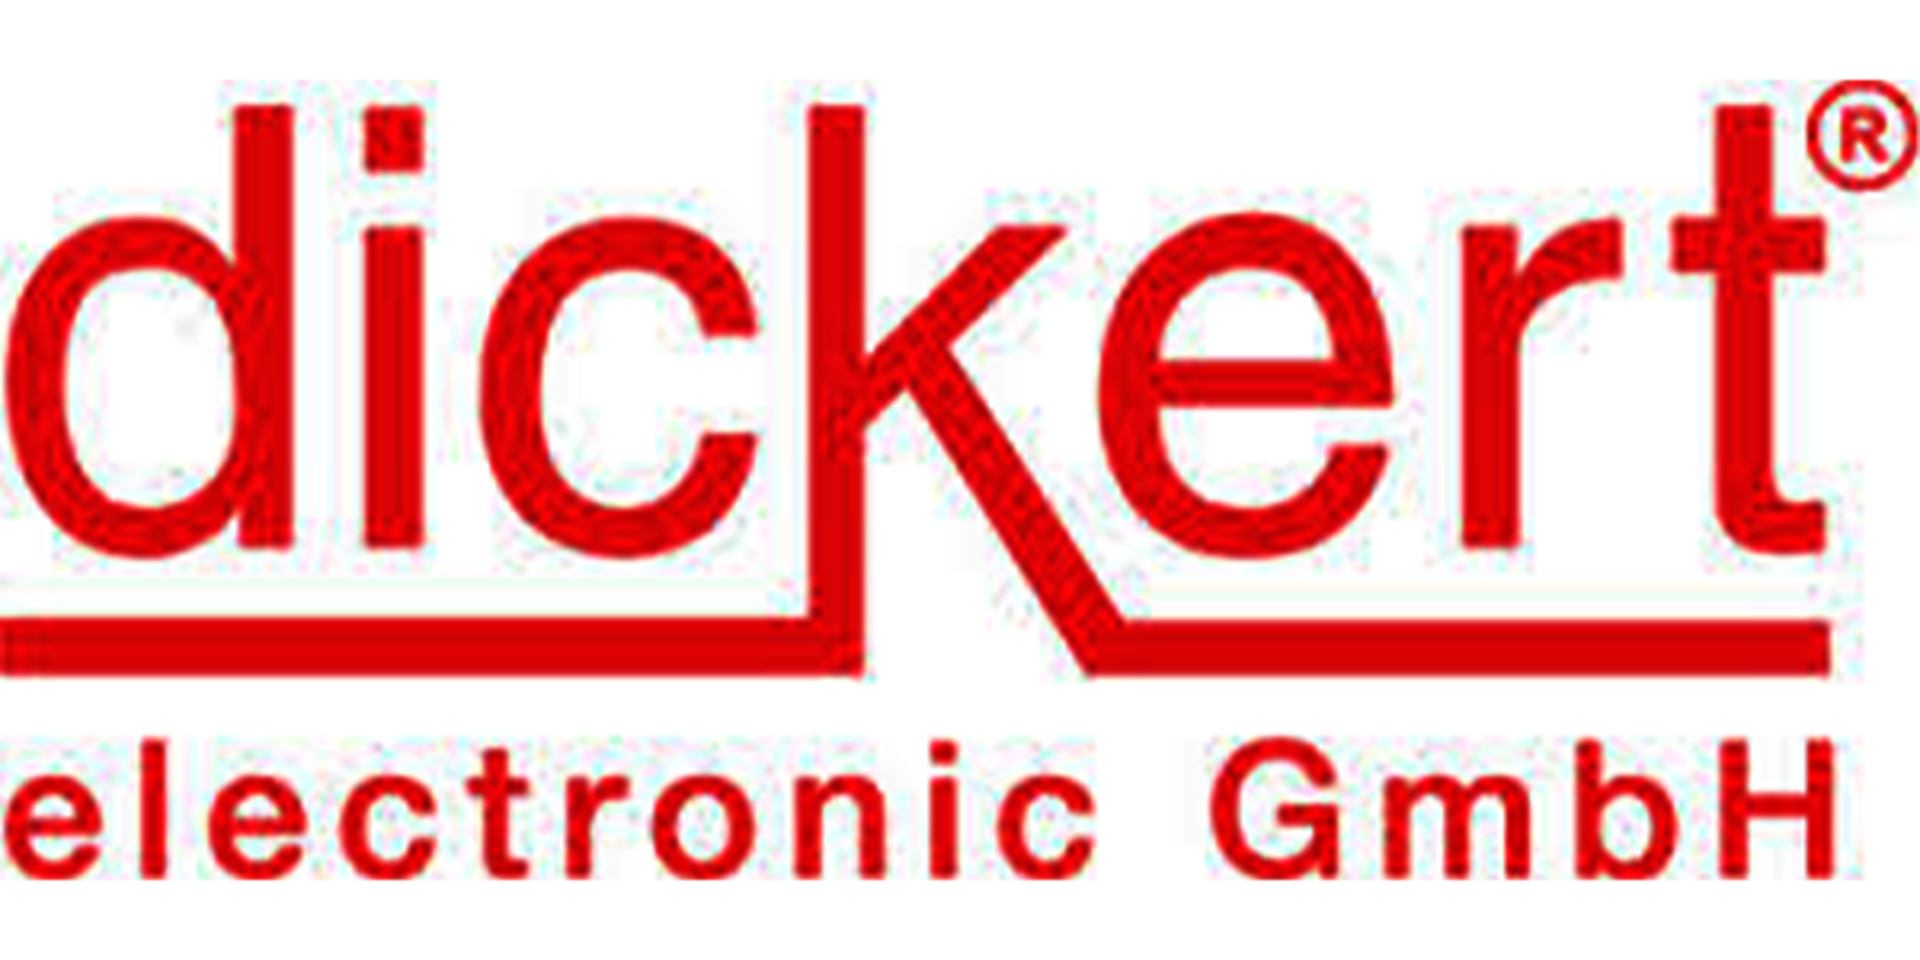 [Translate to Englisch:] Dickert Electronic